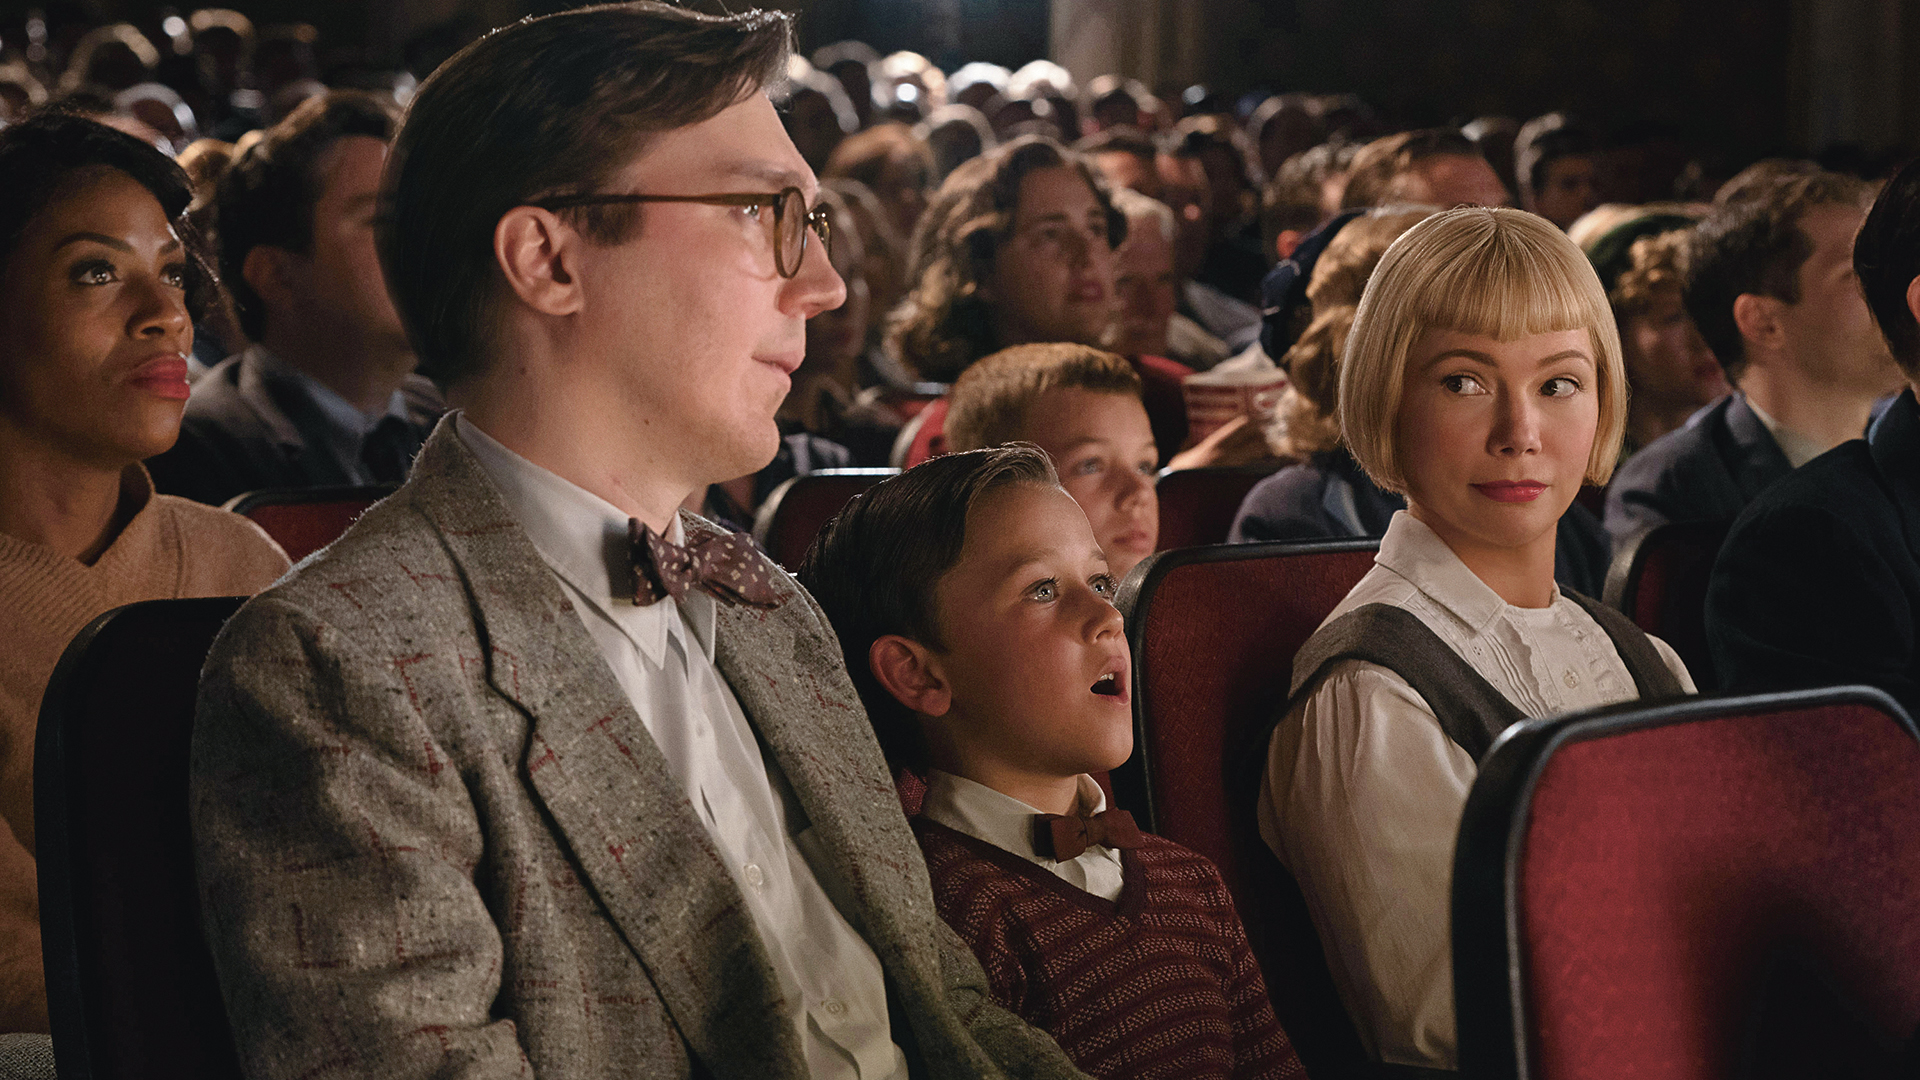 Paul Dano with Mateo Zoryan and Michelle Williams in The Fabelmans